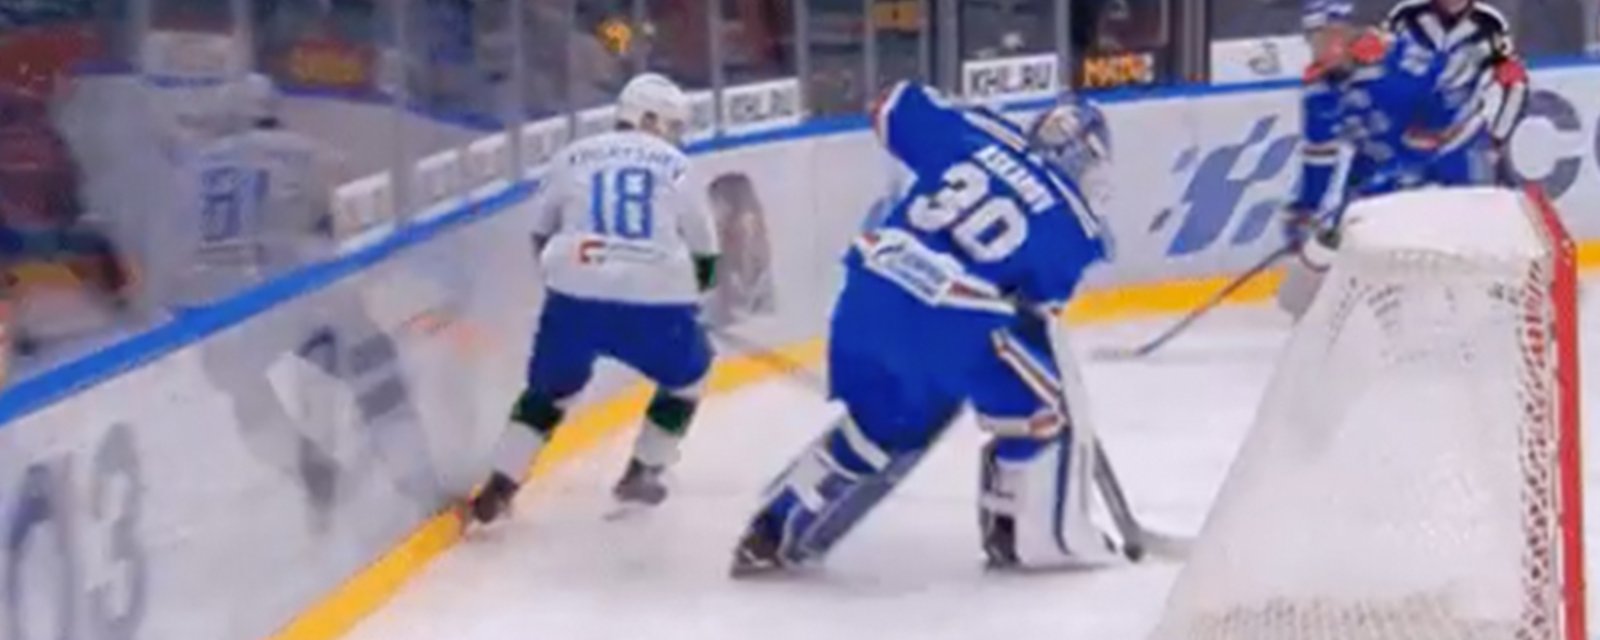 Preds 1st rounder Askarov pulls off an absolutely sick spin-o-rama